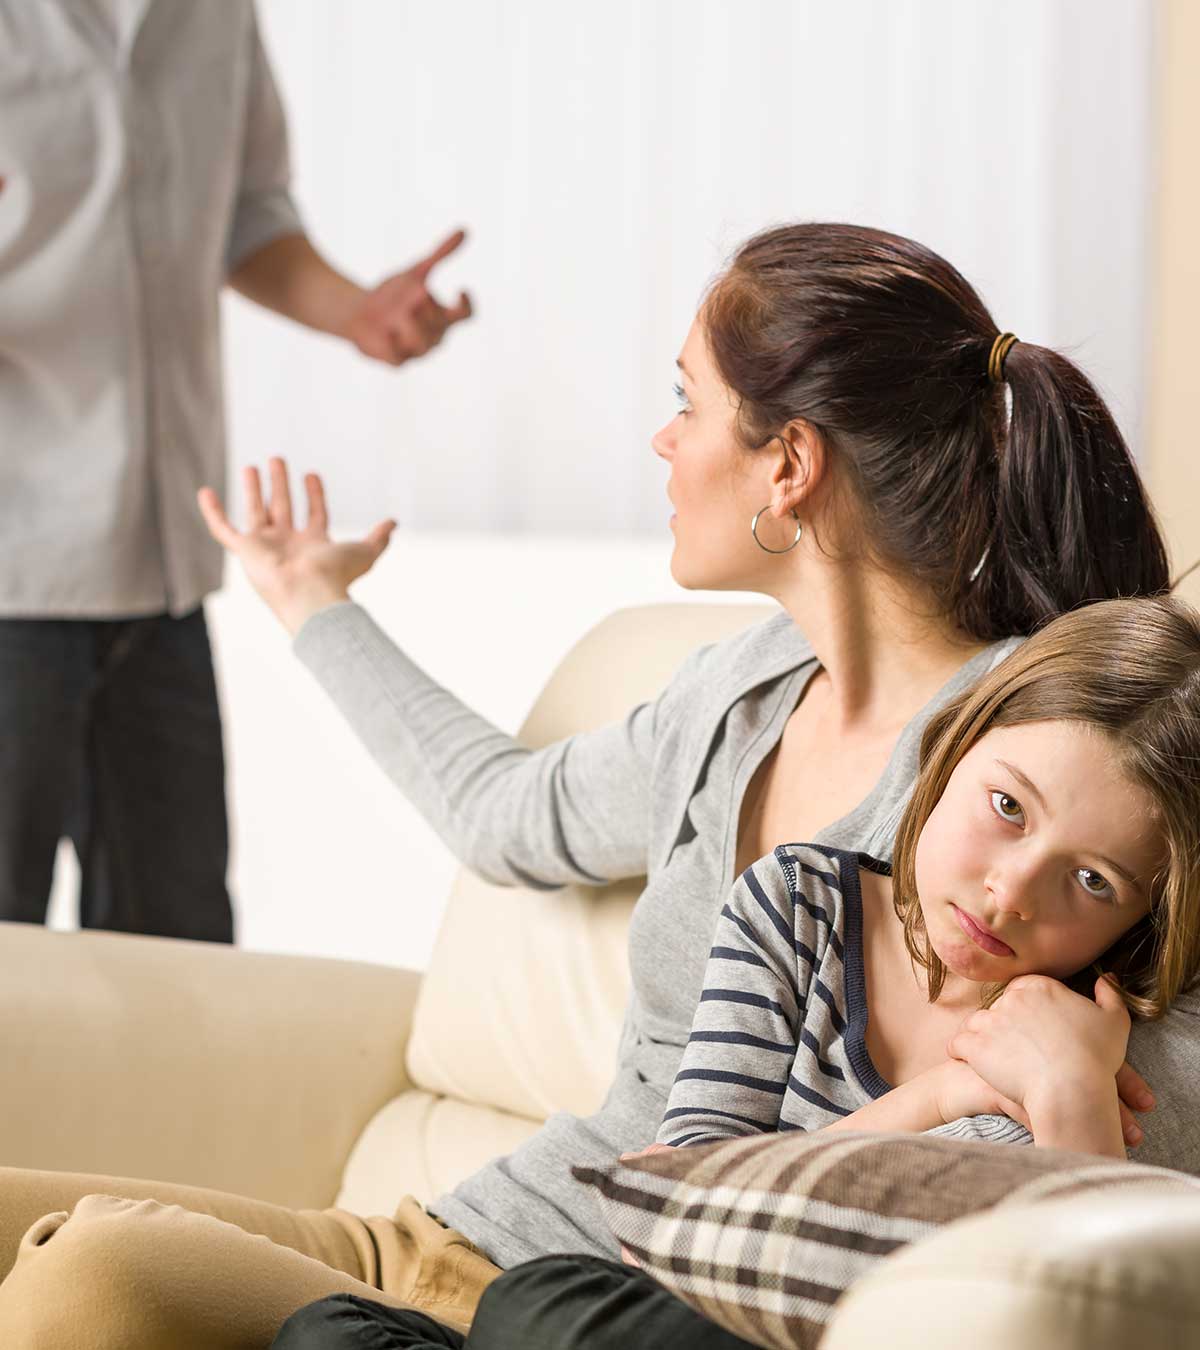 8 Serious Negative Effects Of Verbal Abuse On Children